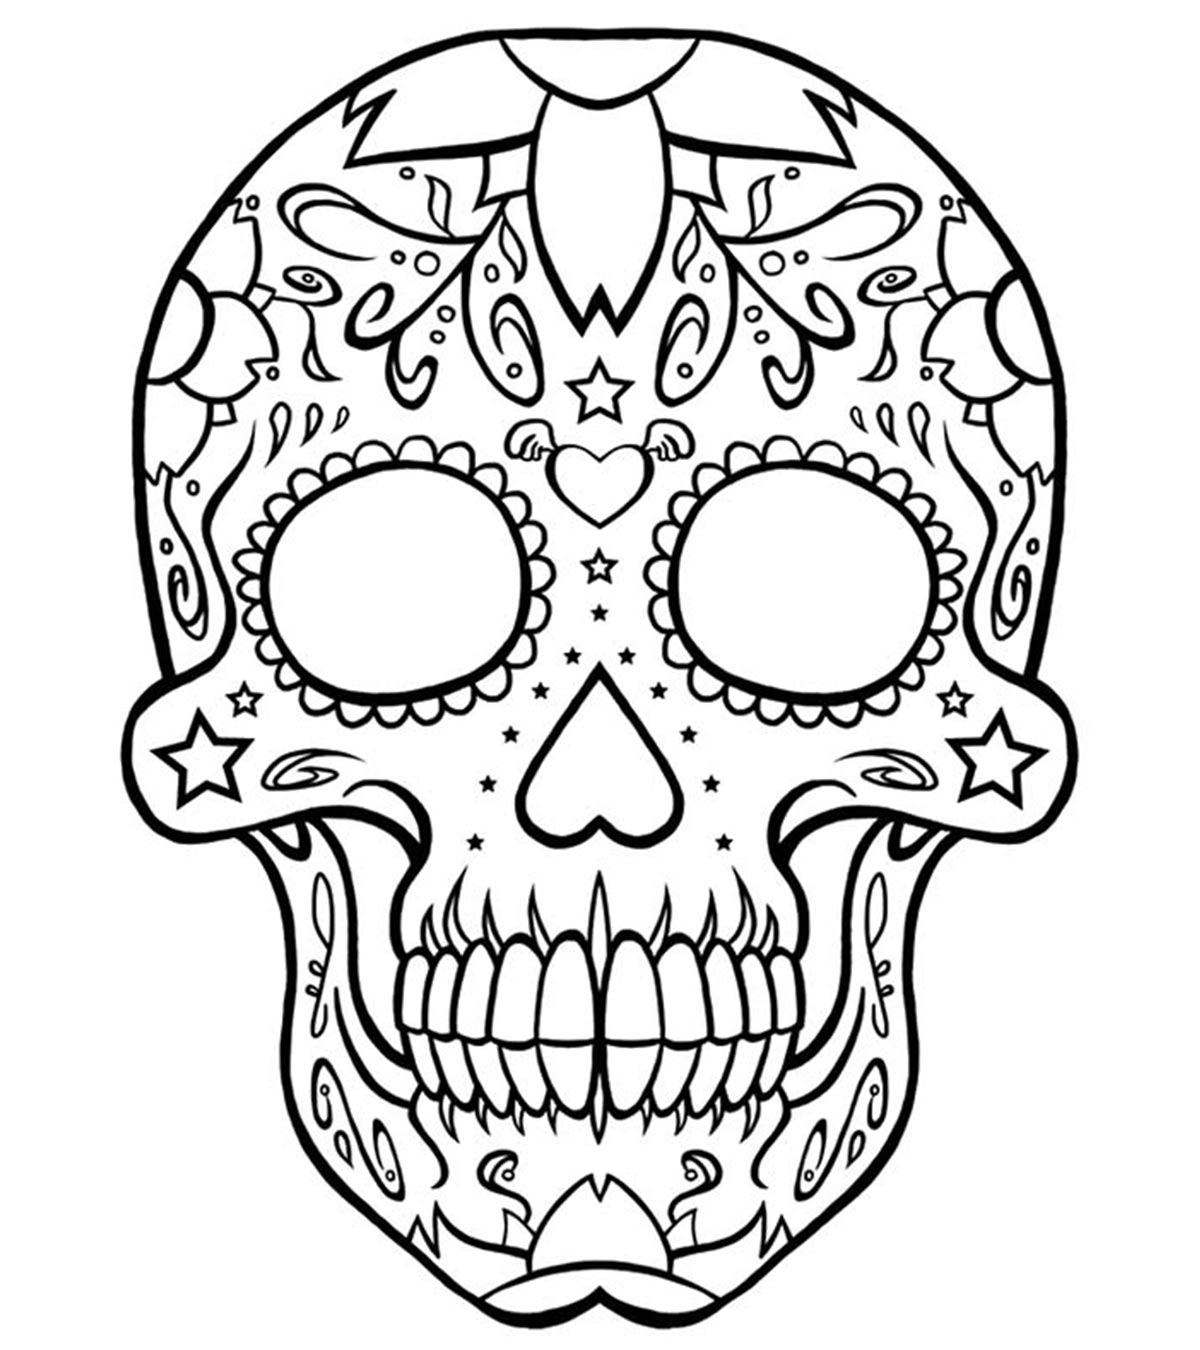 Top 15 Skull Coloring Pages For Your Little One